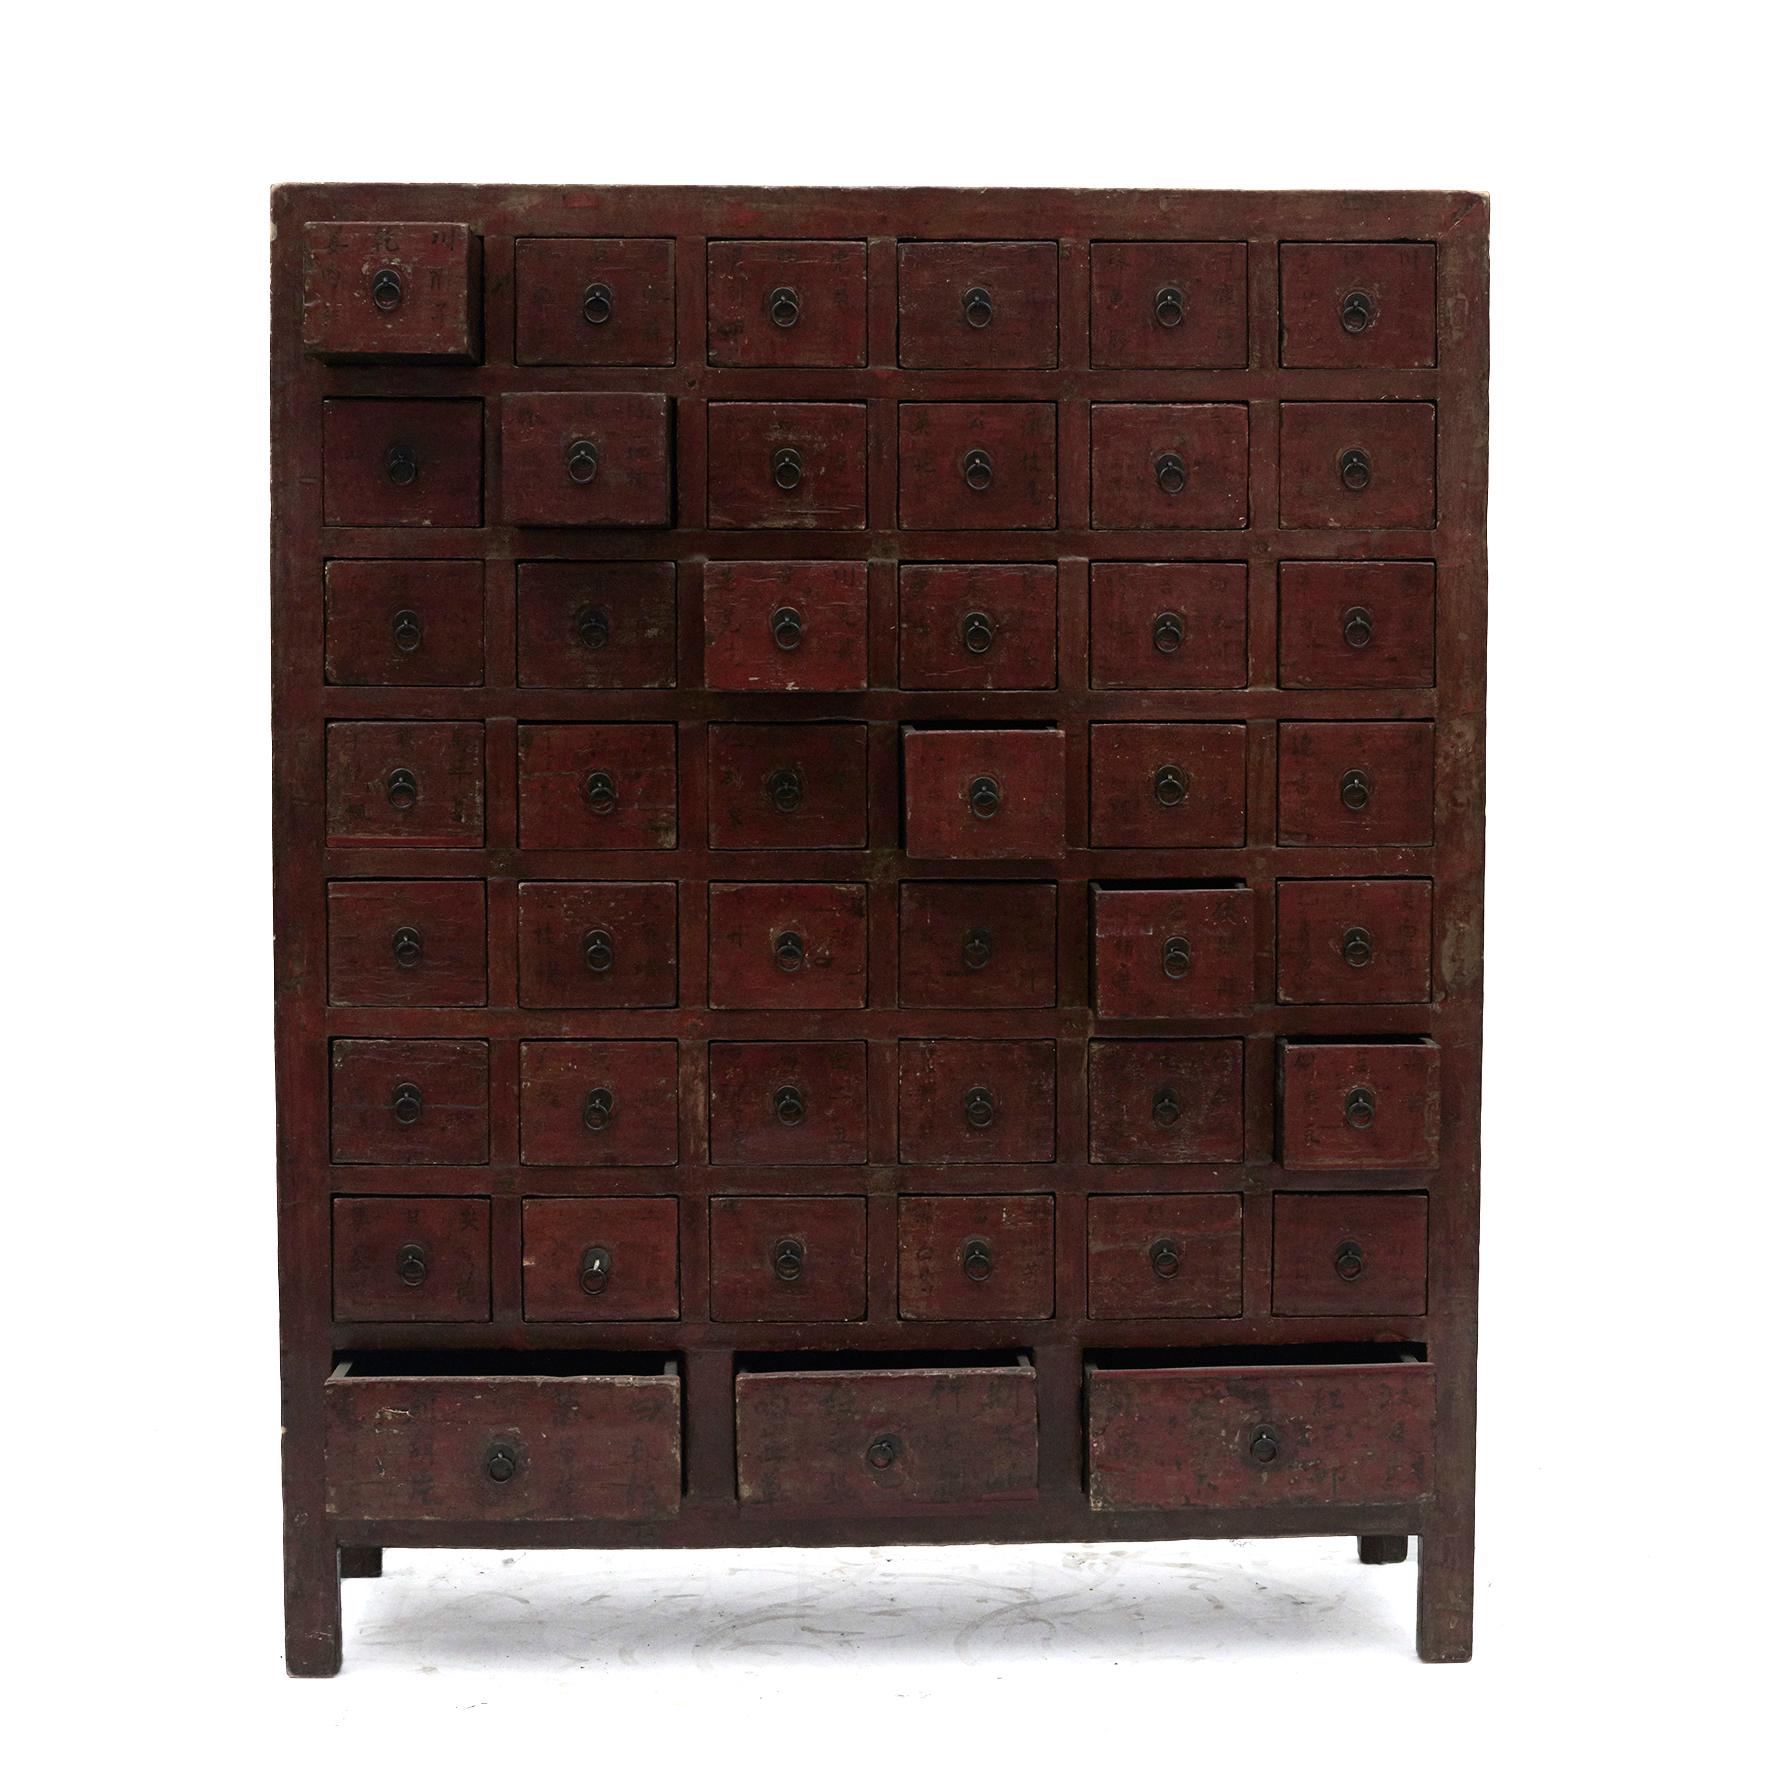 A Chinese Qing Dynasty apothecary / pharmacy medicine chest.
Front in original red lacquer with 45 drawers (42 small drawers + 3 larger drawers at the bottom). 
ach drawer with hand written Chinese calligraphy in black lacquer.
These were used to